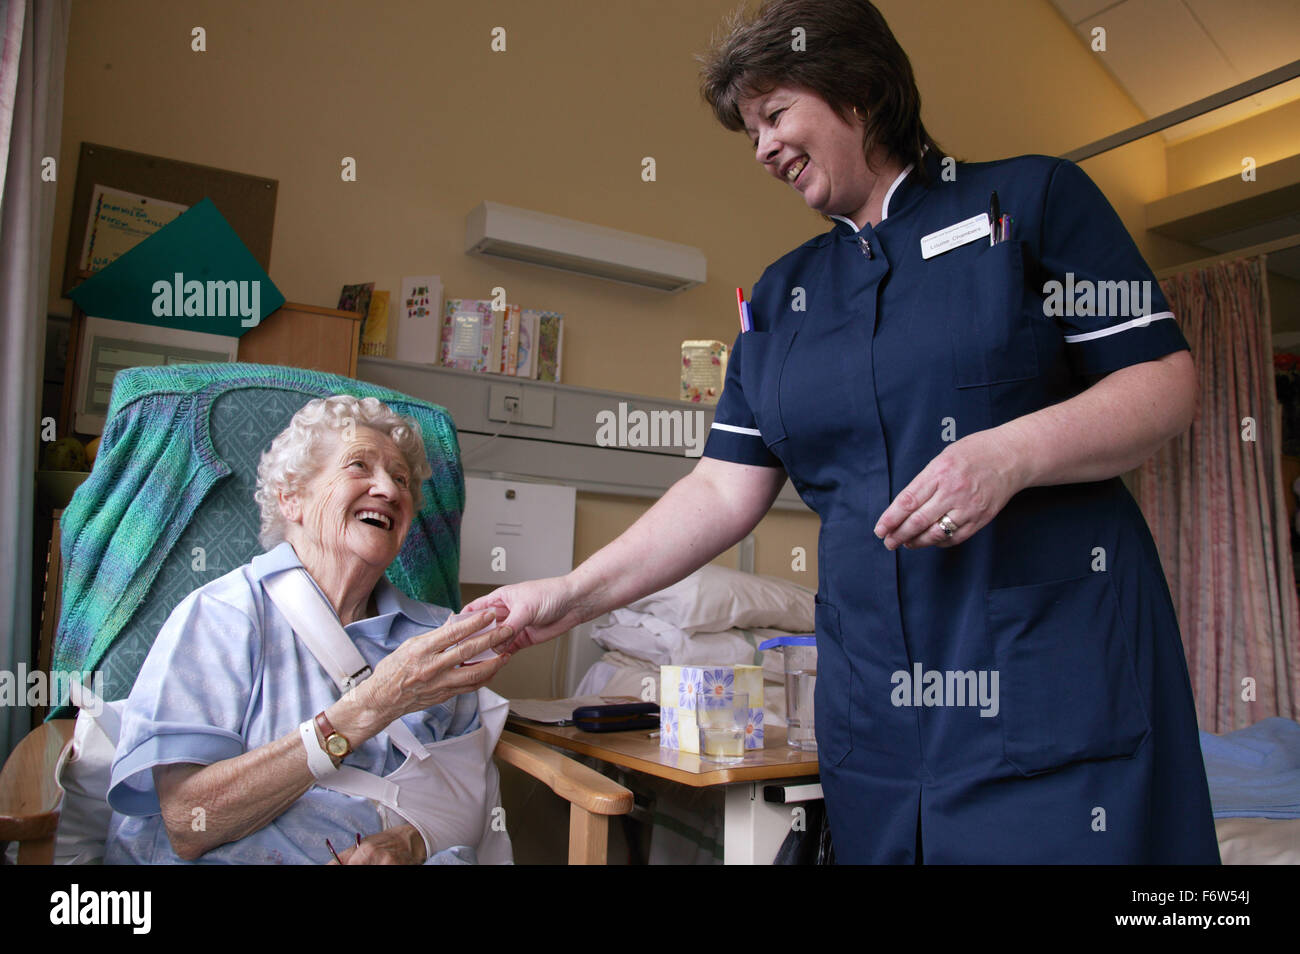 Nurse with disability administering medication to elderly patient in hospital, Stock Photo